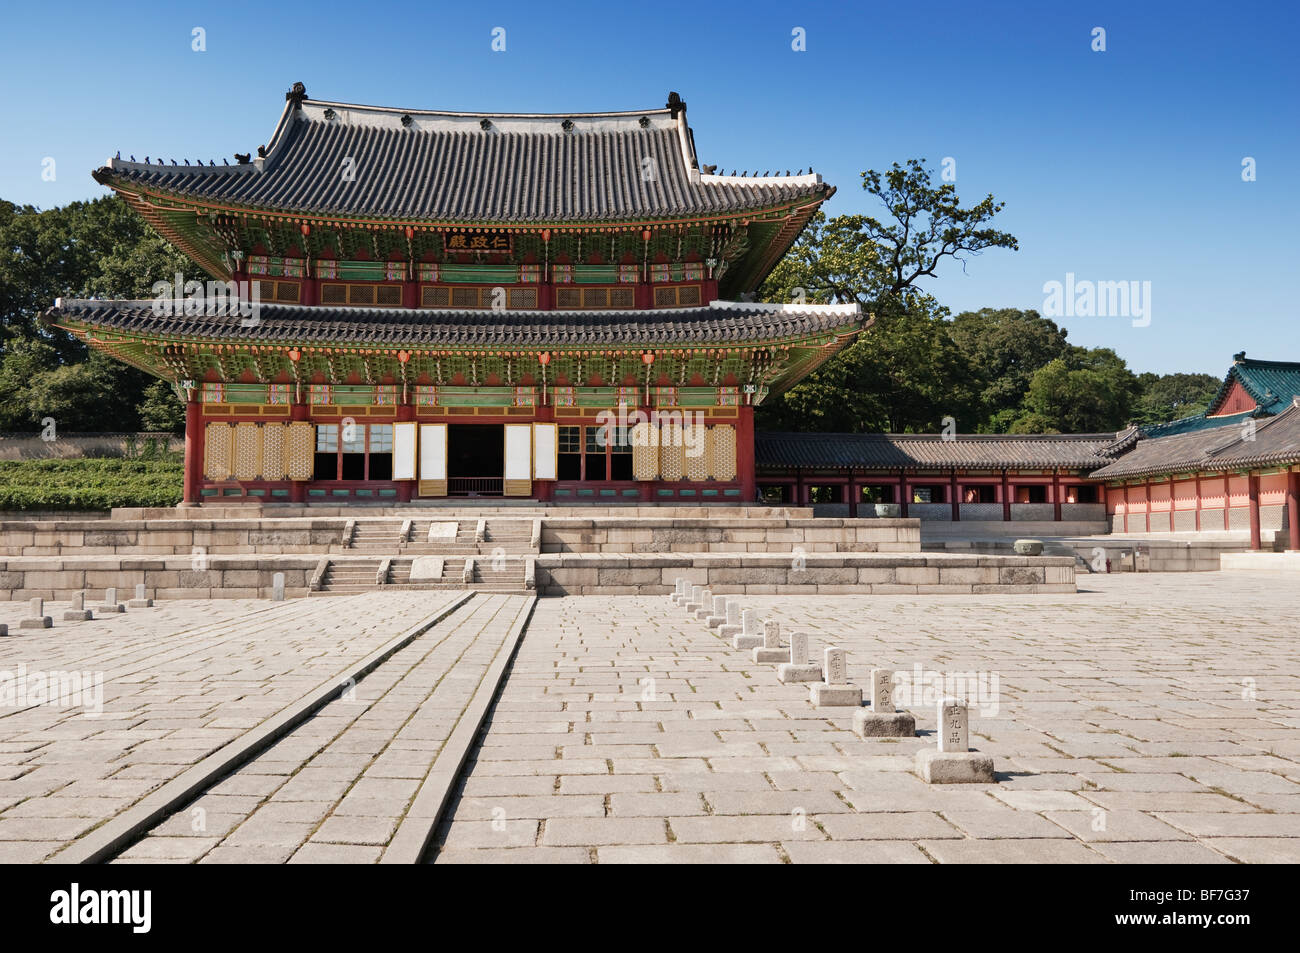 The Injeongjeon throne hall of Changdeokgung Royal Palace in Seoul, South Korea. Stock Photo